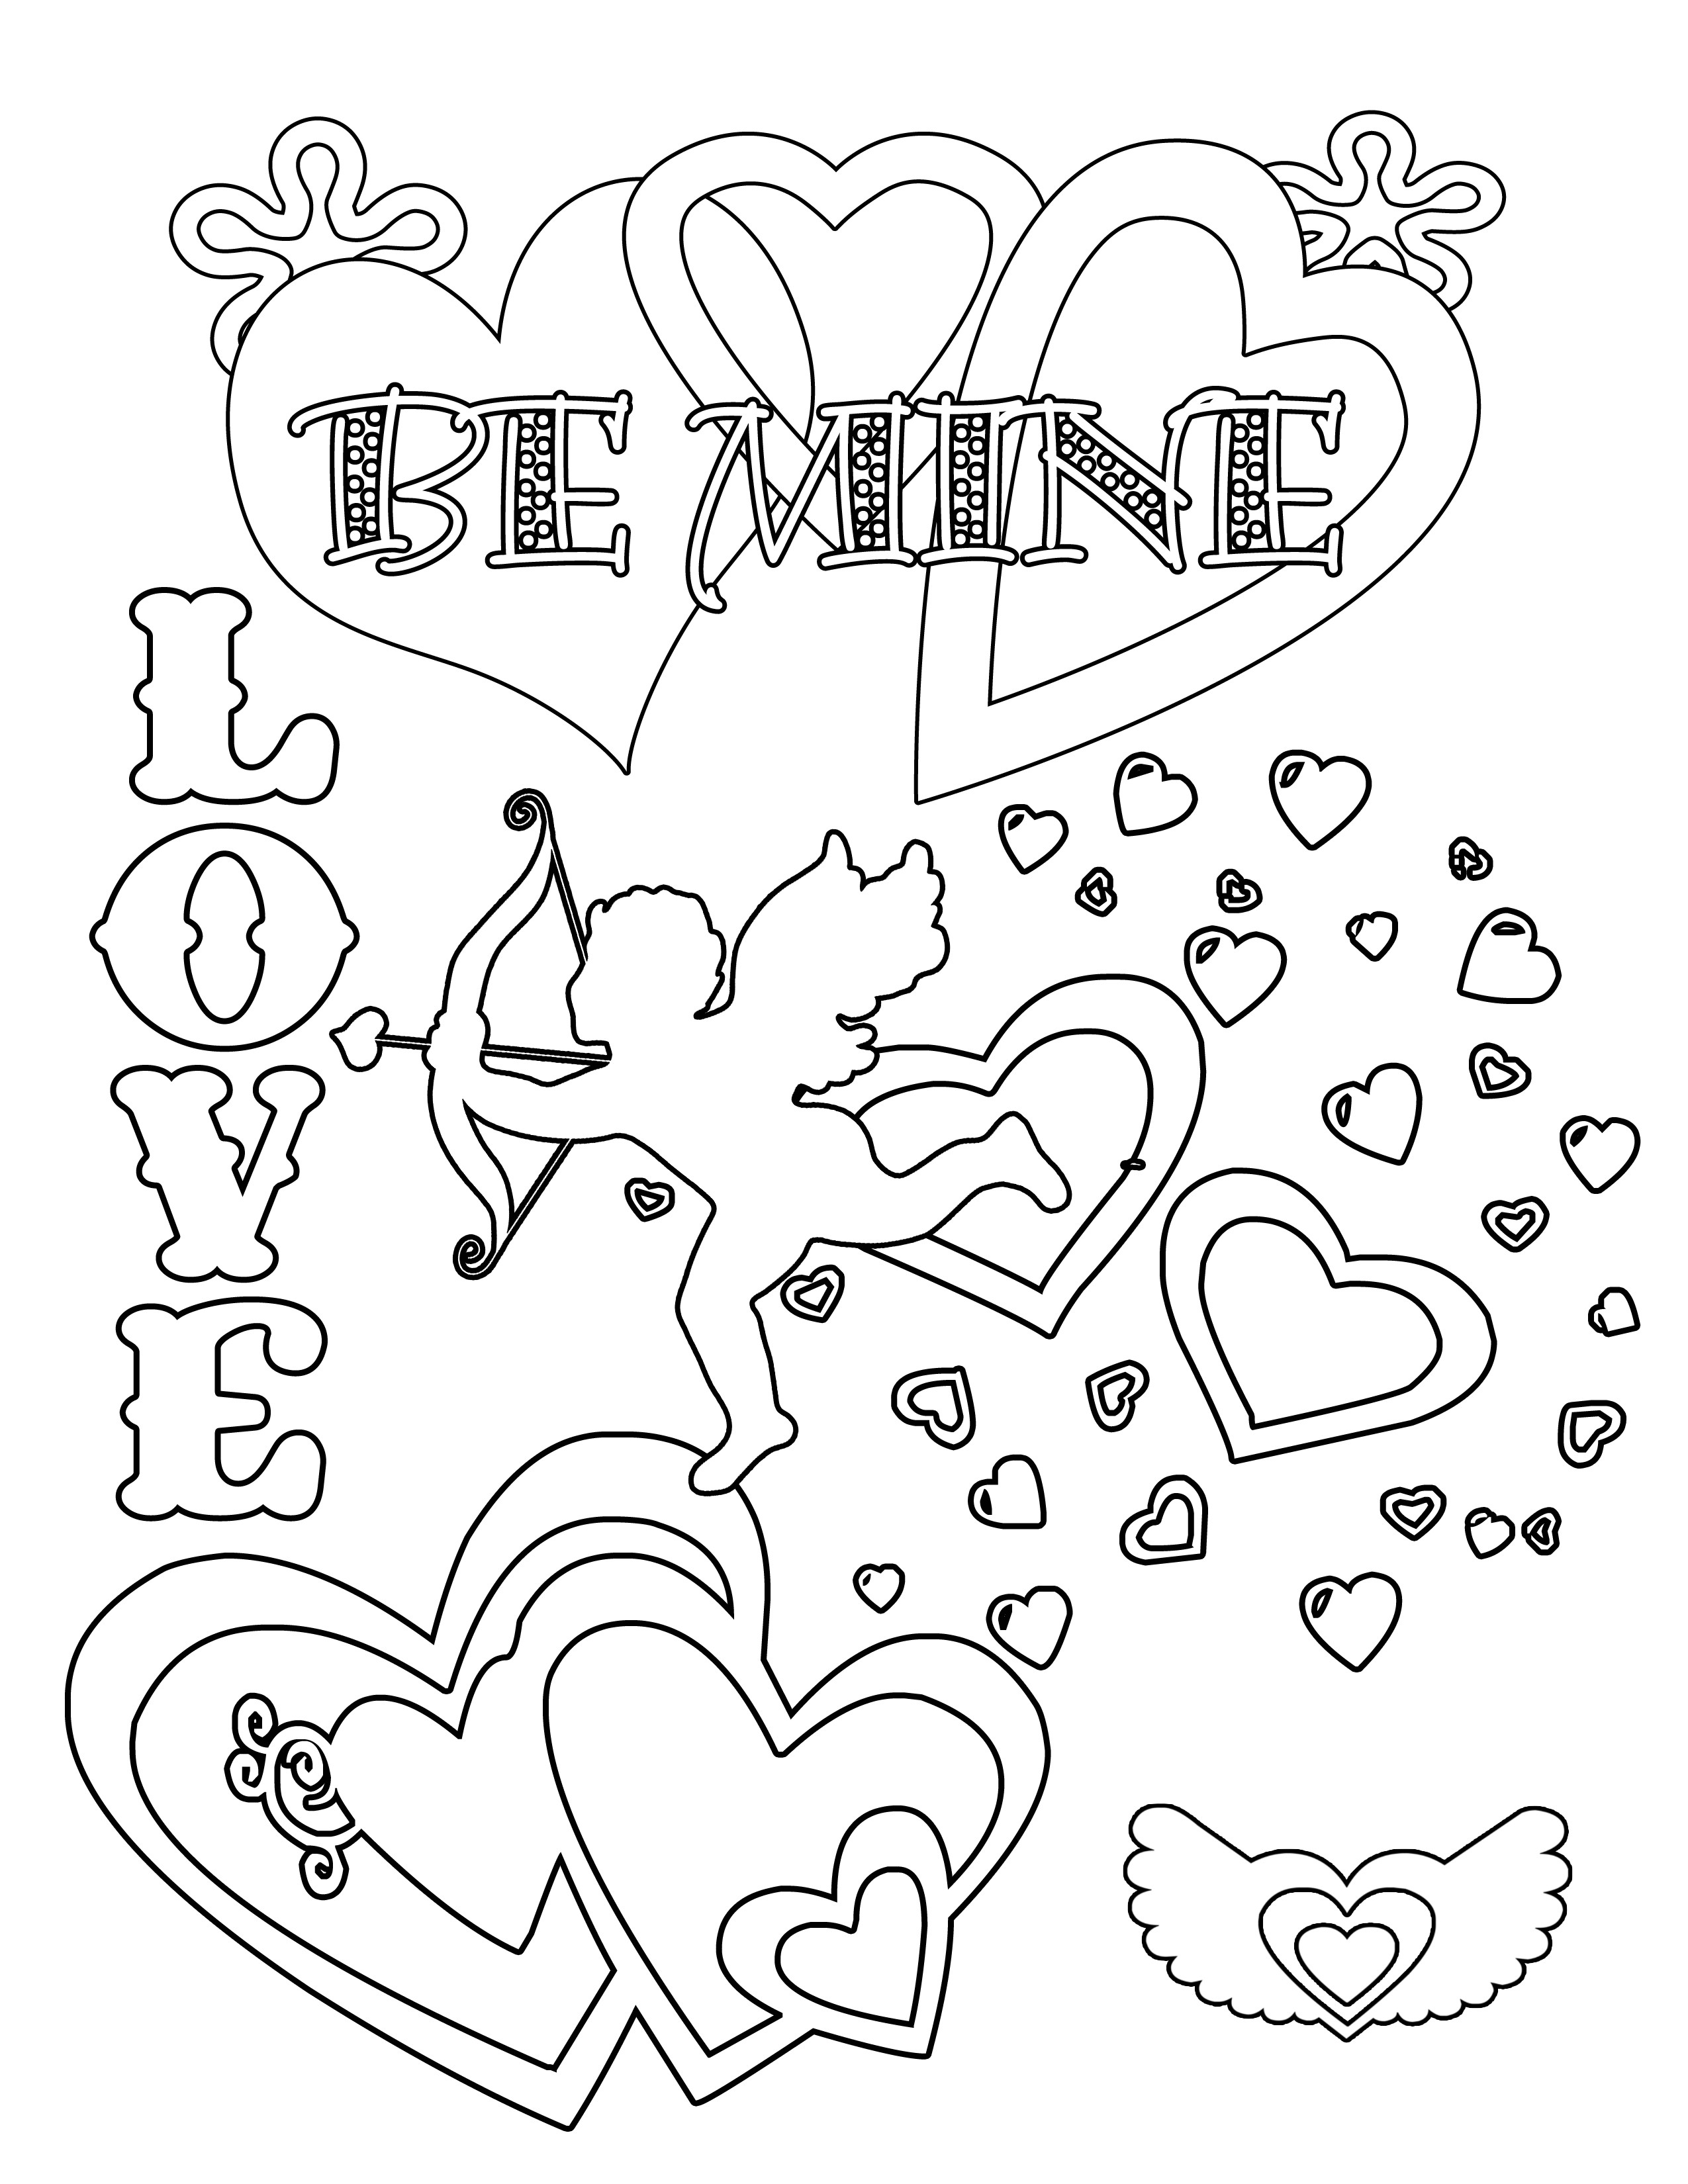 Valentines Coloring Sheets For Kids
 Valentine Coloring Pages Best Coloring Pages For Kids